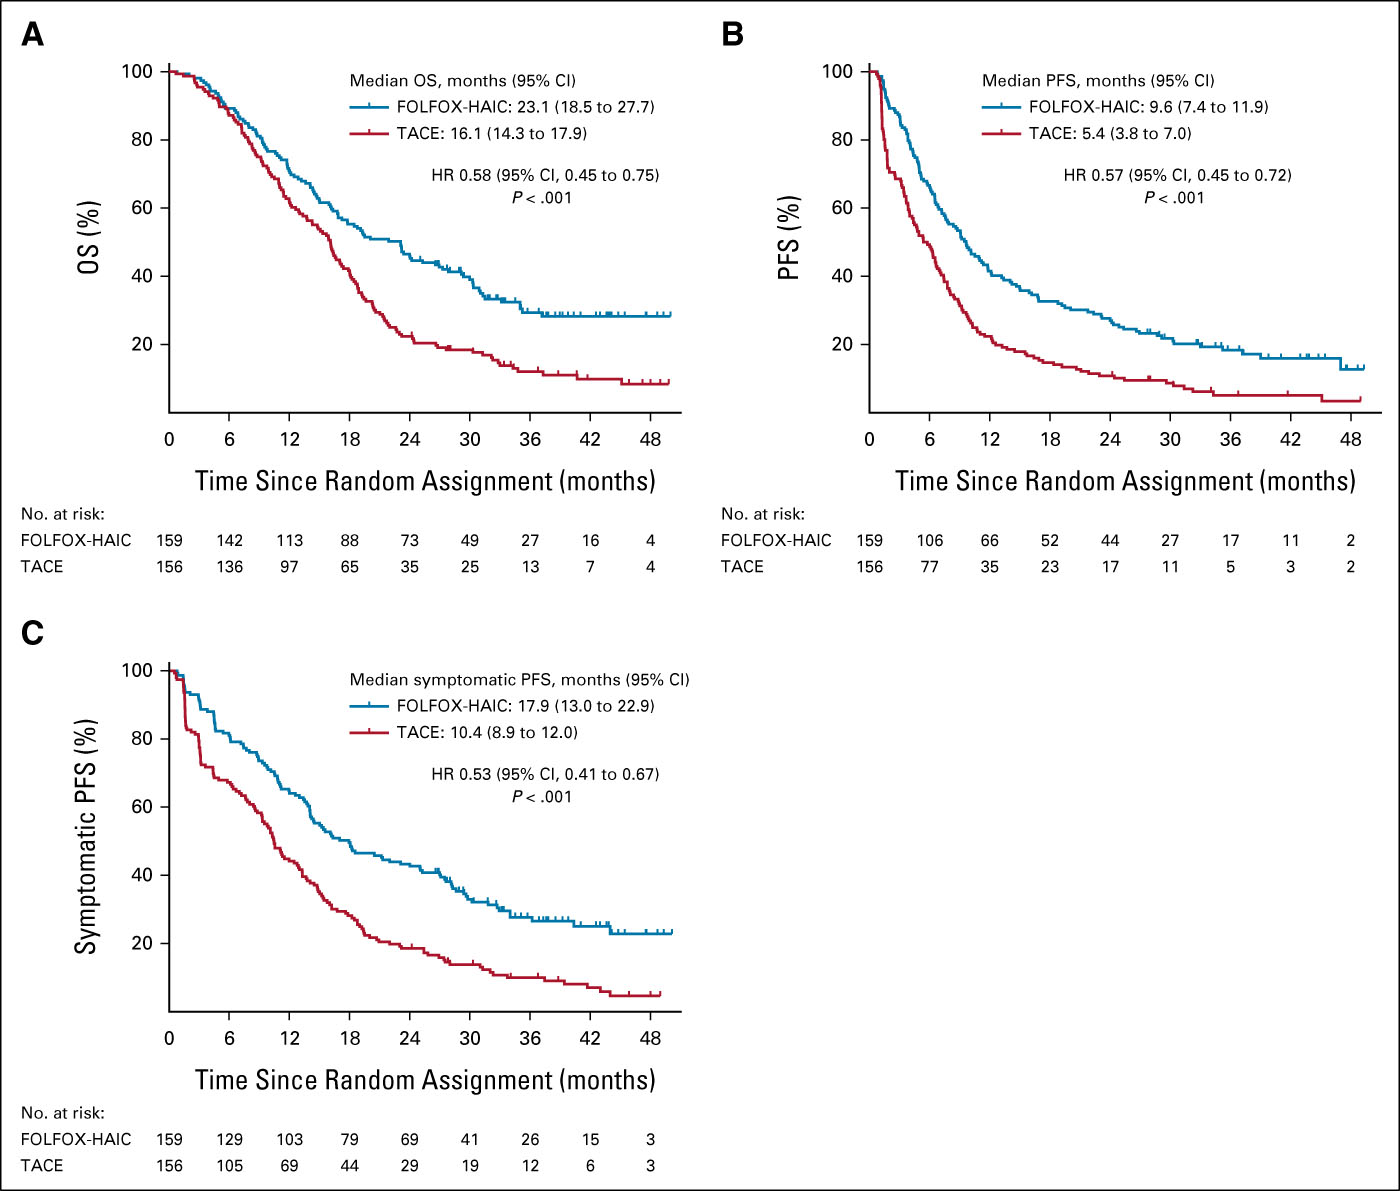 Hepatic Arterial Infusion of Oxaliplatin, Fluorouracil, and Leucovorin Versus Transarterial Chemoembolization for Large Hepatocellular Carcinoma: A Randomized Phase III Trial | Journal of Clinical Oncology